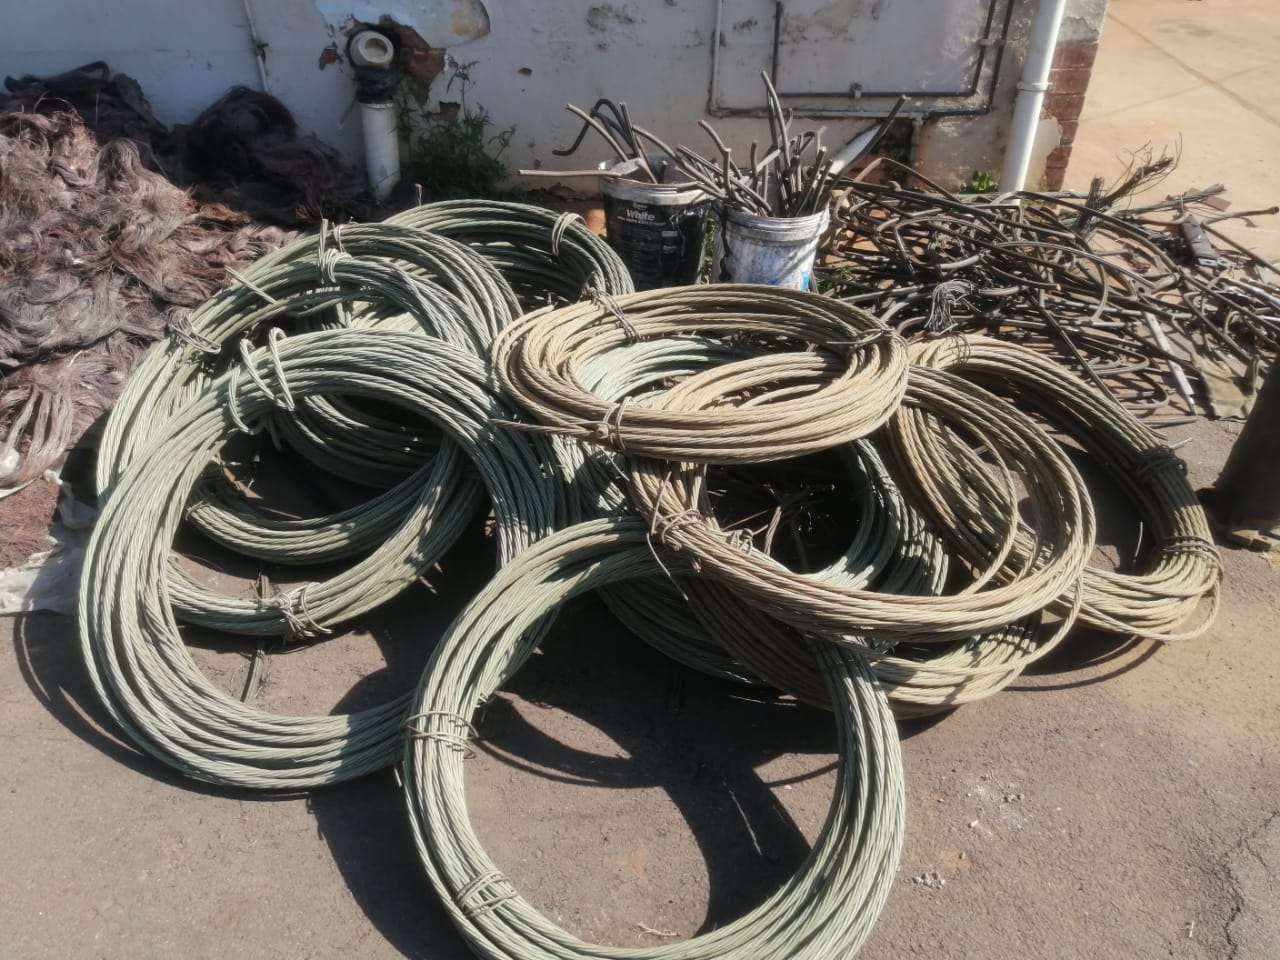 Drugs and copper cables recovered